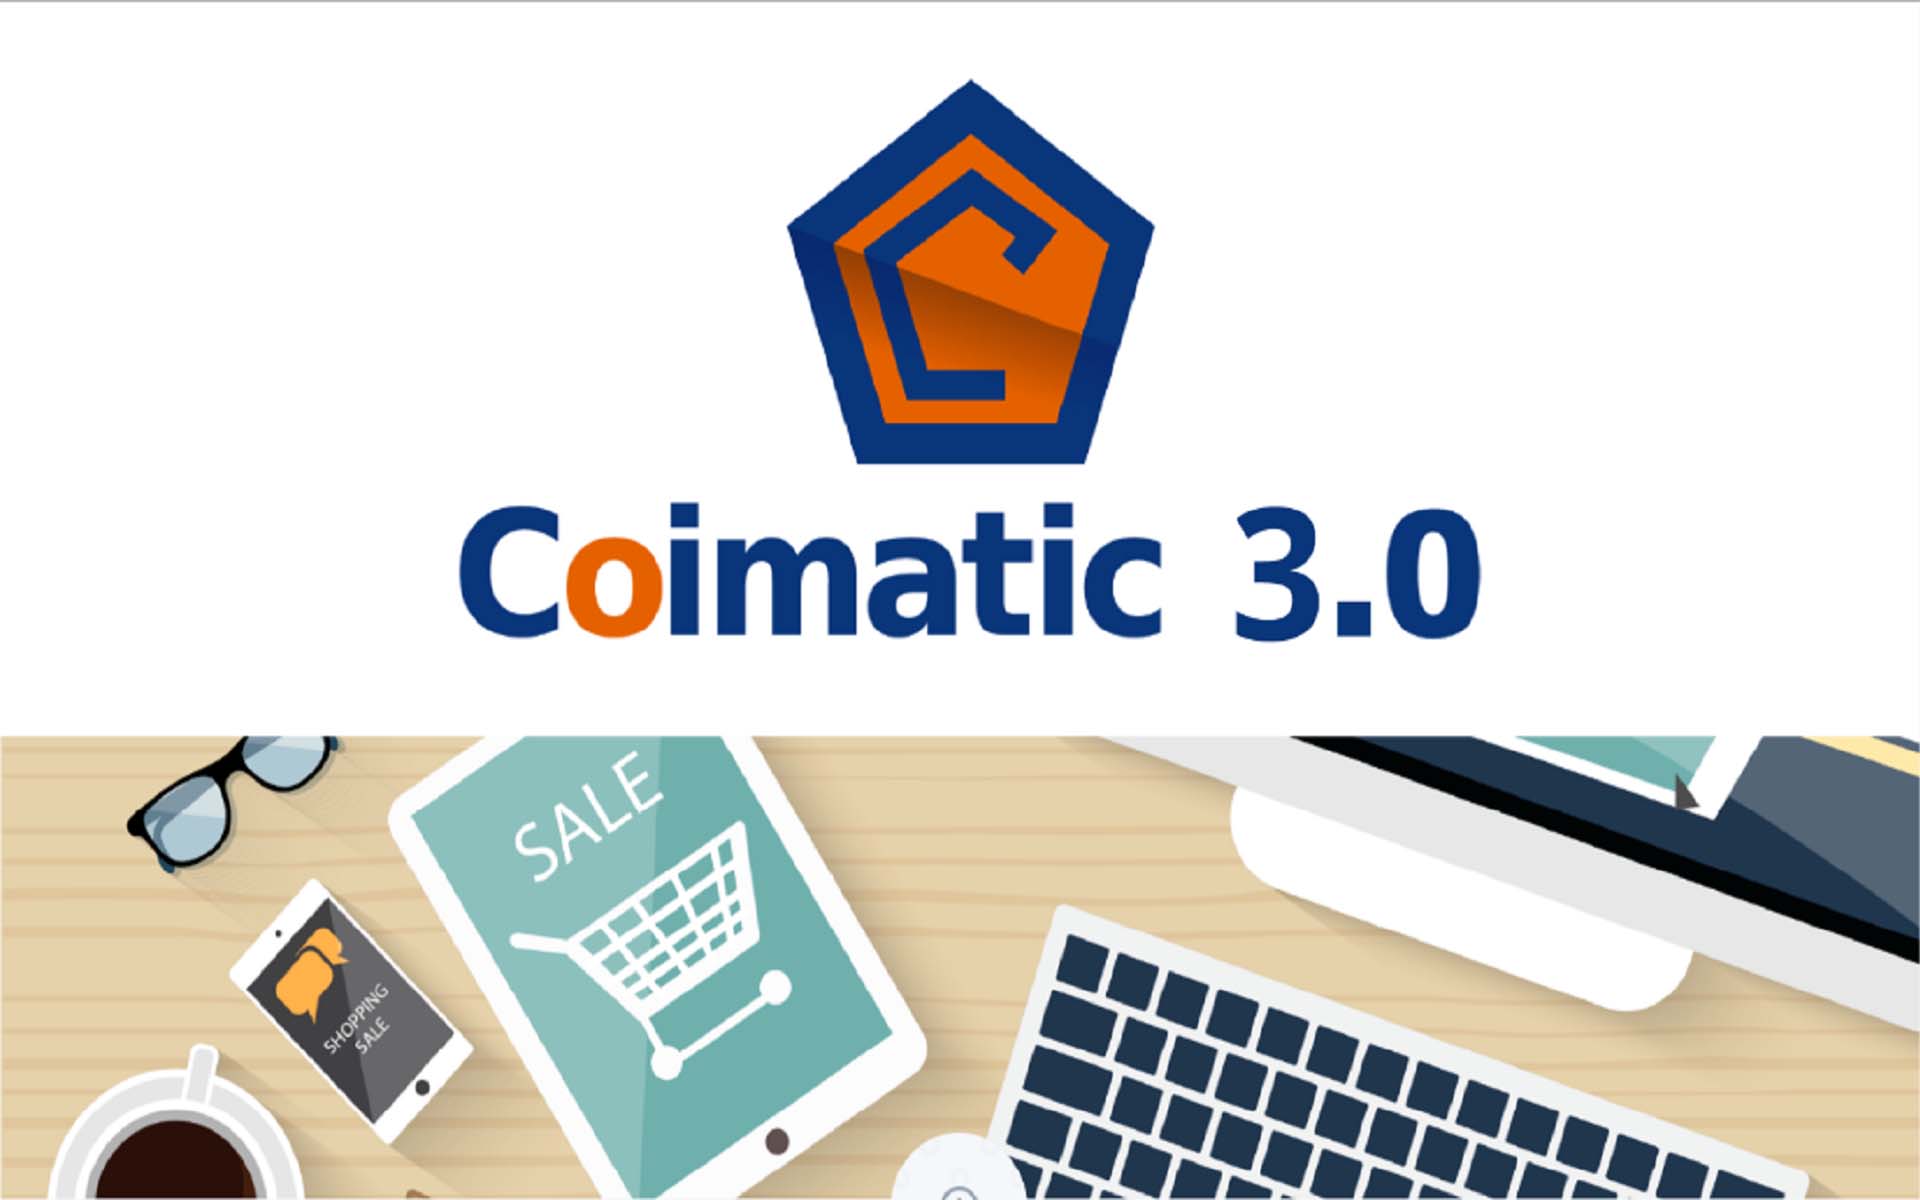 Coimatic 2.0 Swapping To Coimatic 3.0 Ethereum Token Will Close in 7 Days